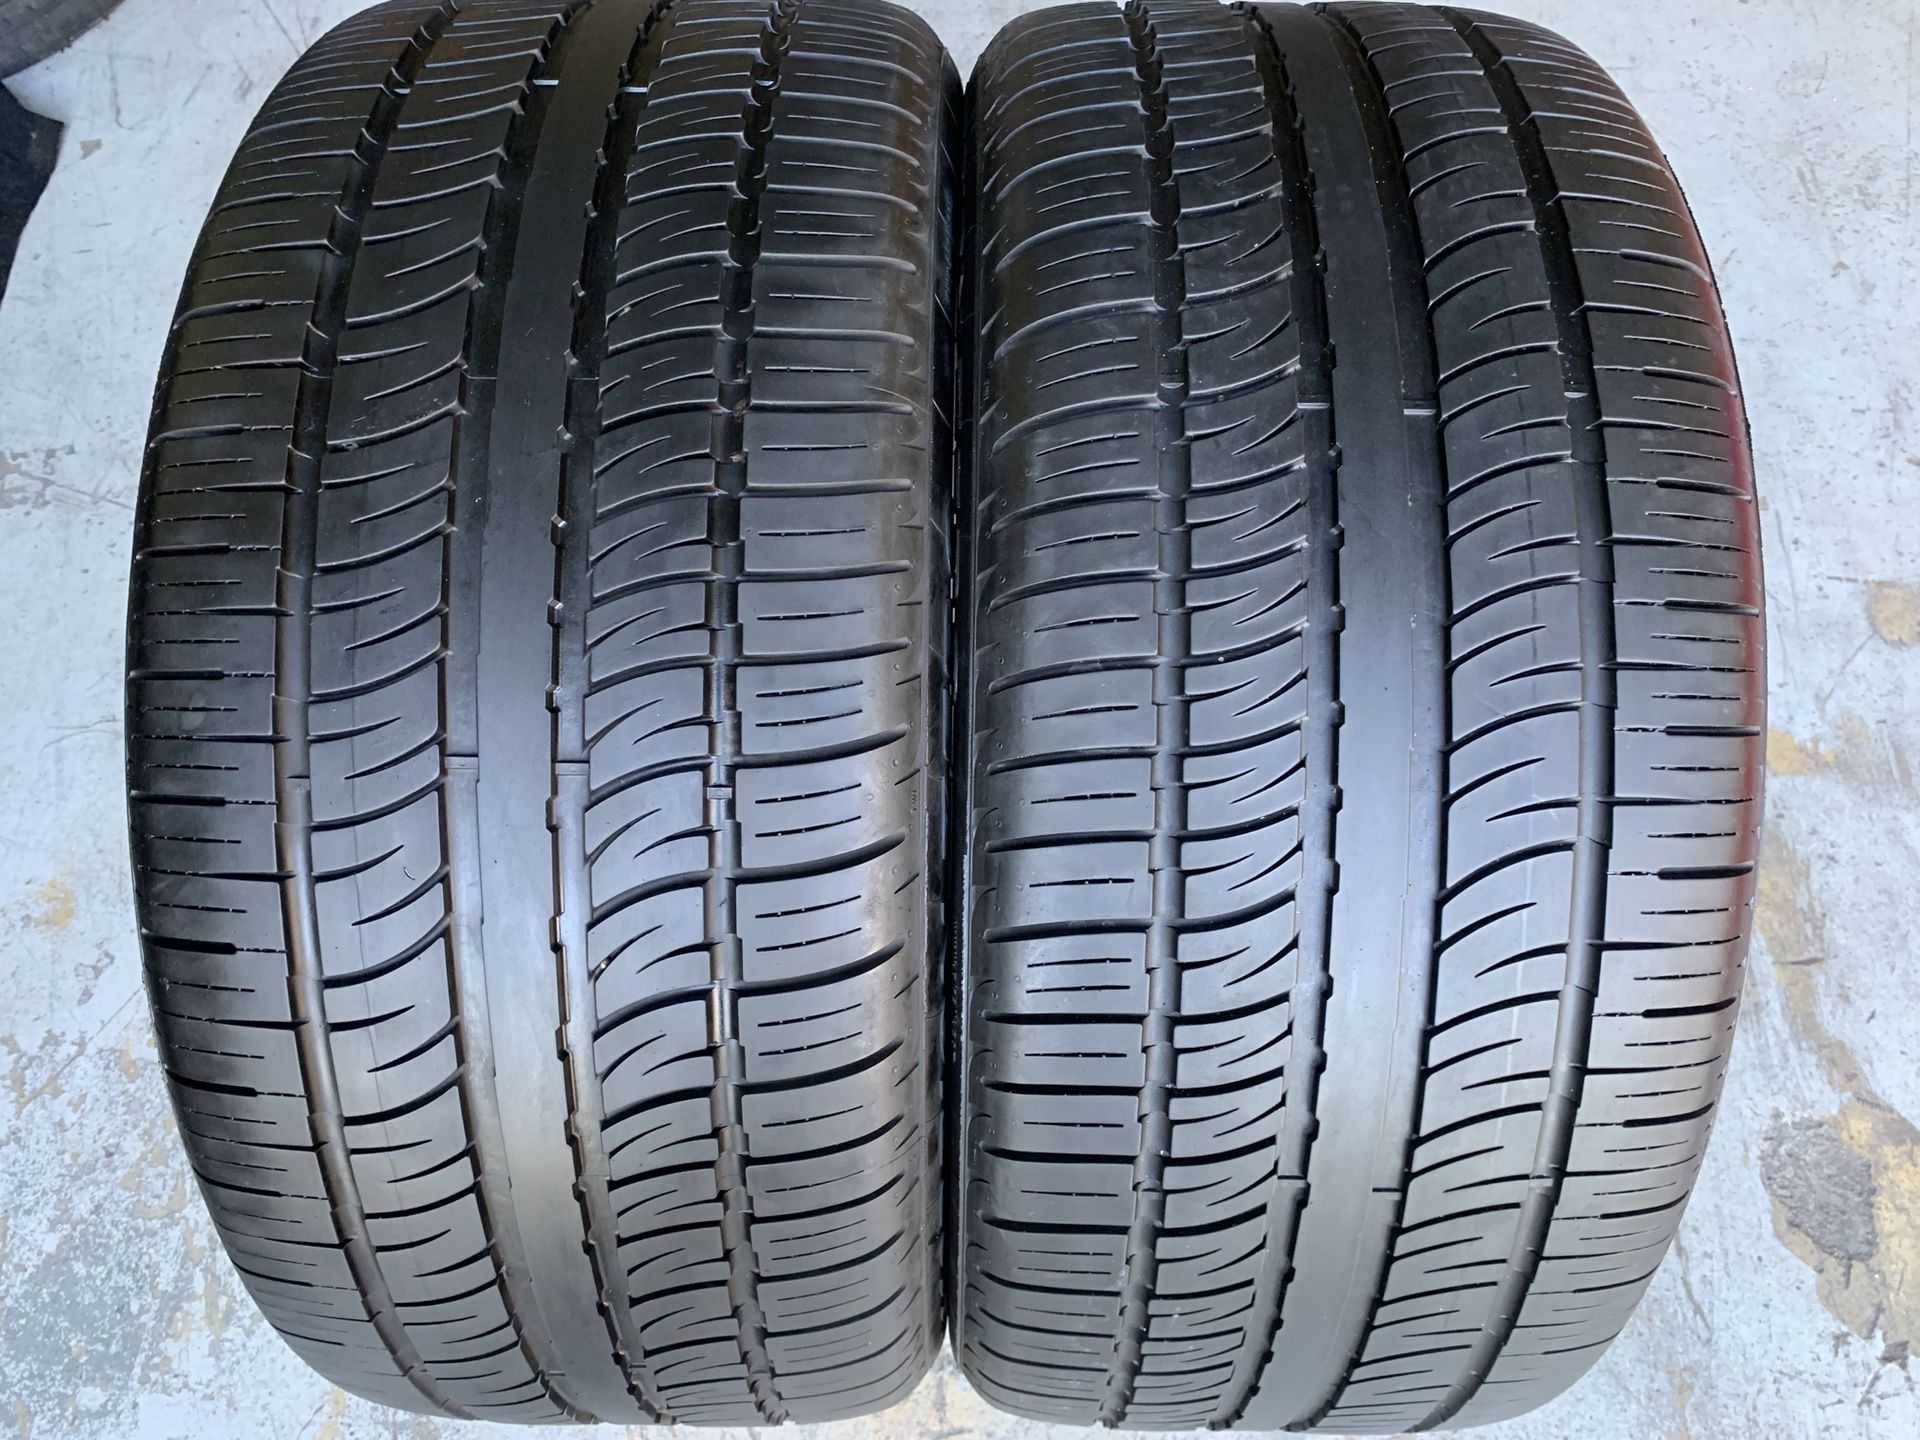 Two 295/40/22 Pirelli Scorpion Zero like new with 90-100% left rare hard to find DOT 2019